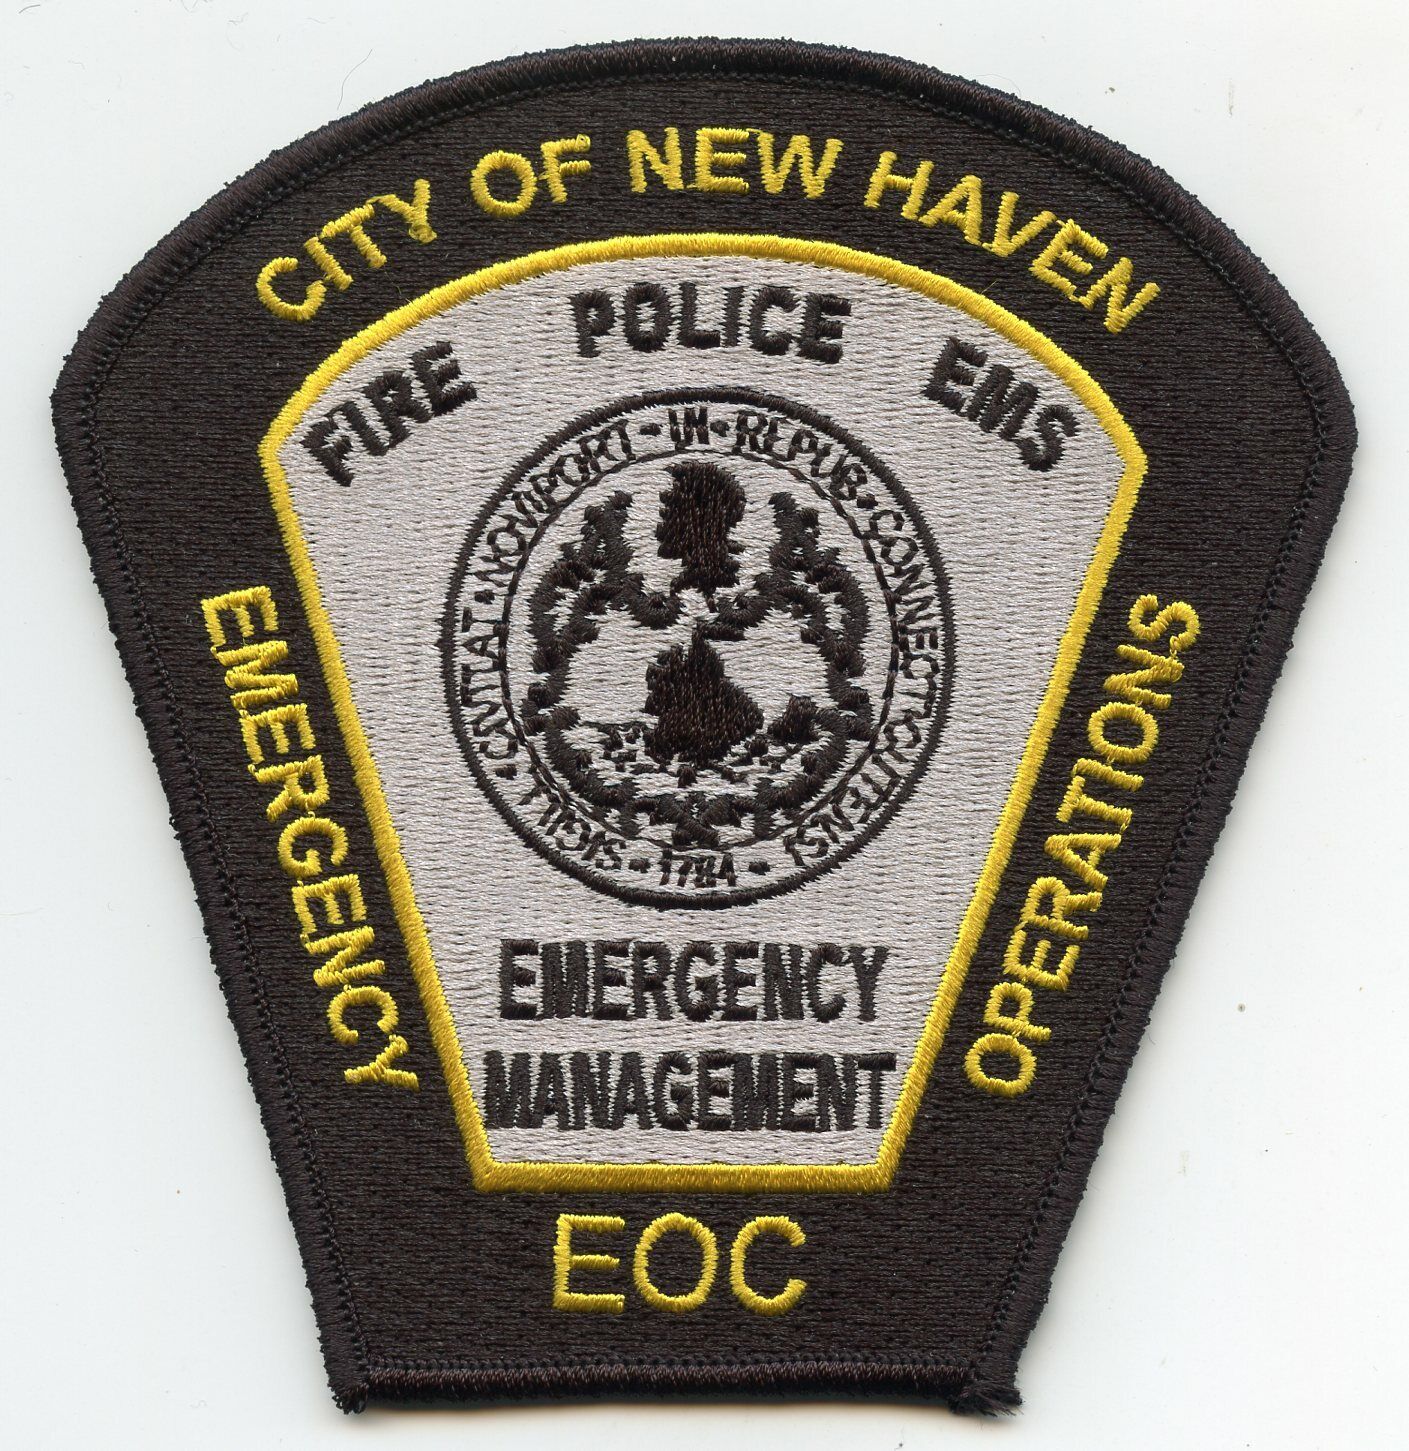 NEW HAVEN CONNECTICUT CT EMERGENCY MANAGEMENT OPERATIONS EMS FIRE POLICE PATCH